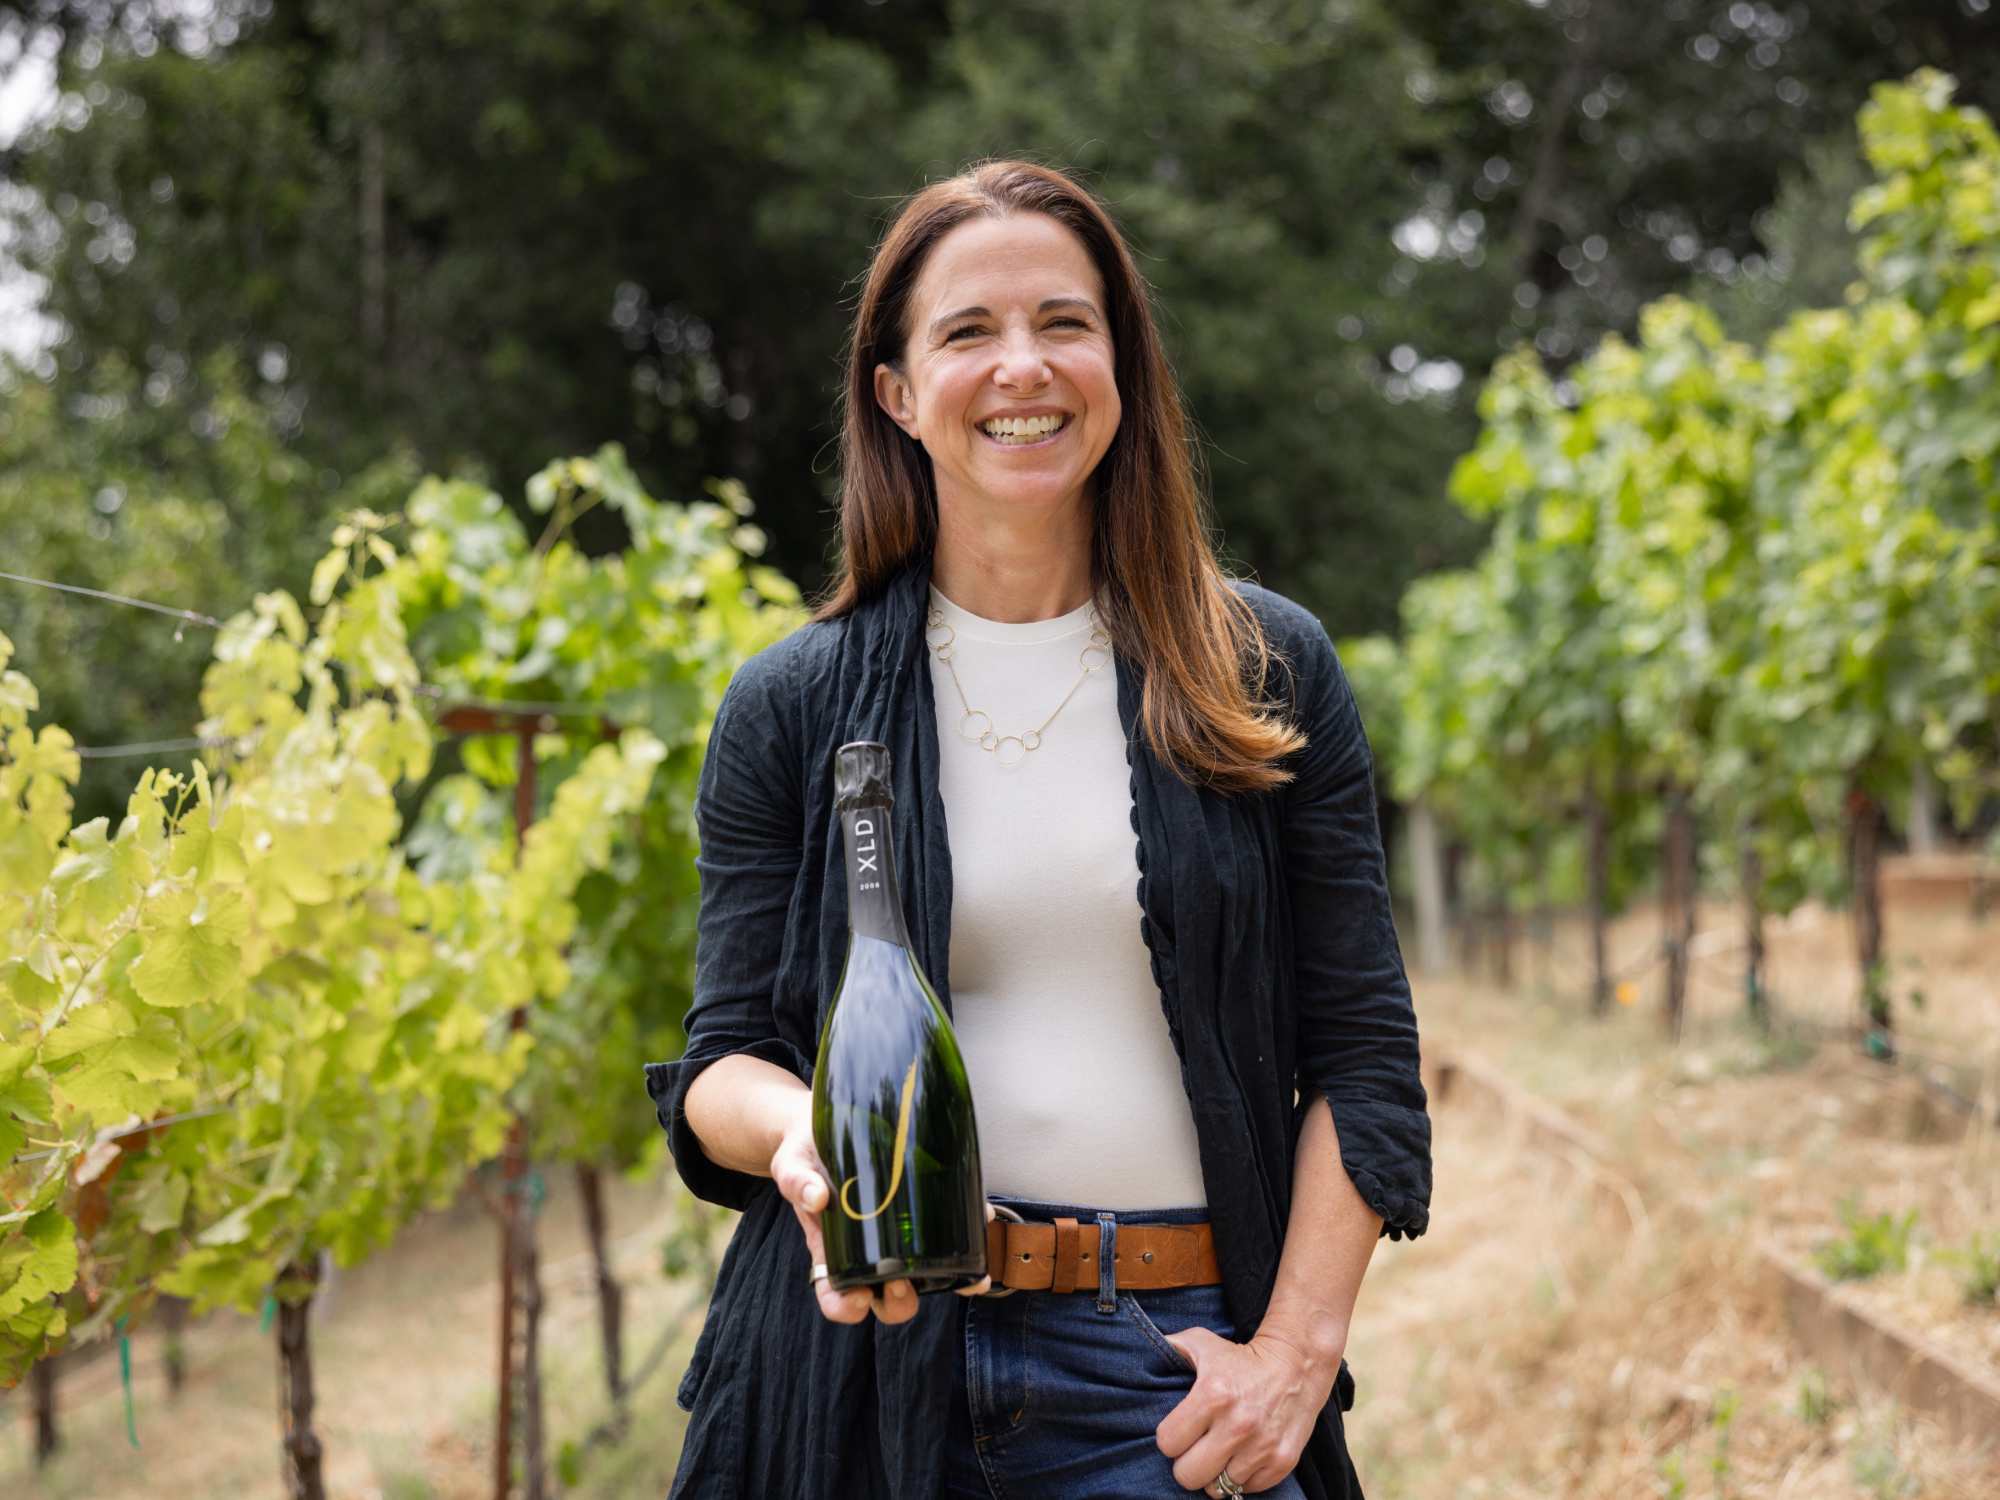 J Vineyards Nicole Hitchcok was voted Winemaker of the Year